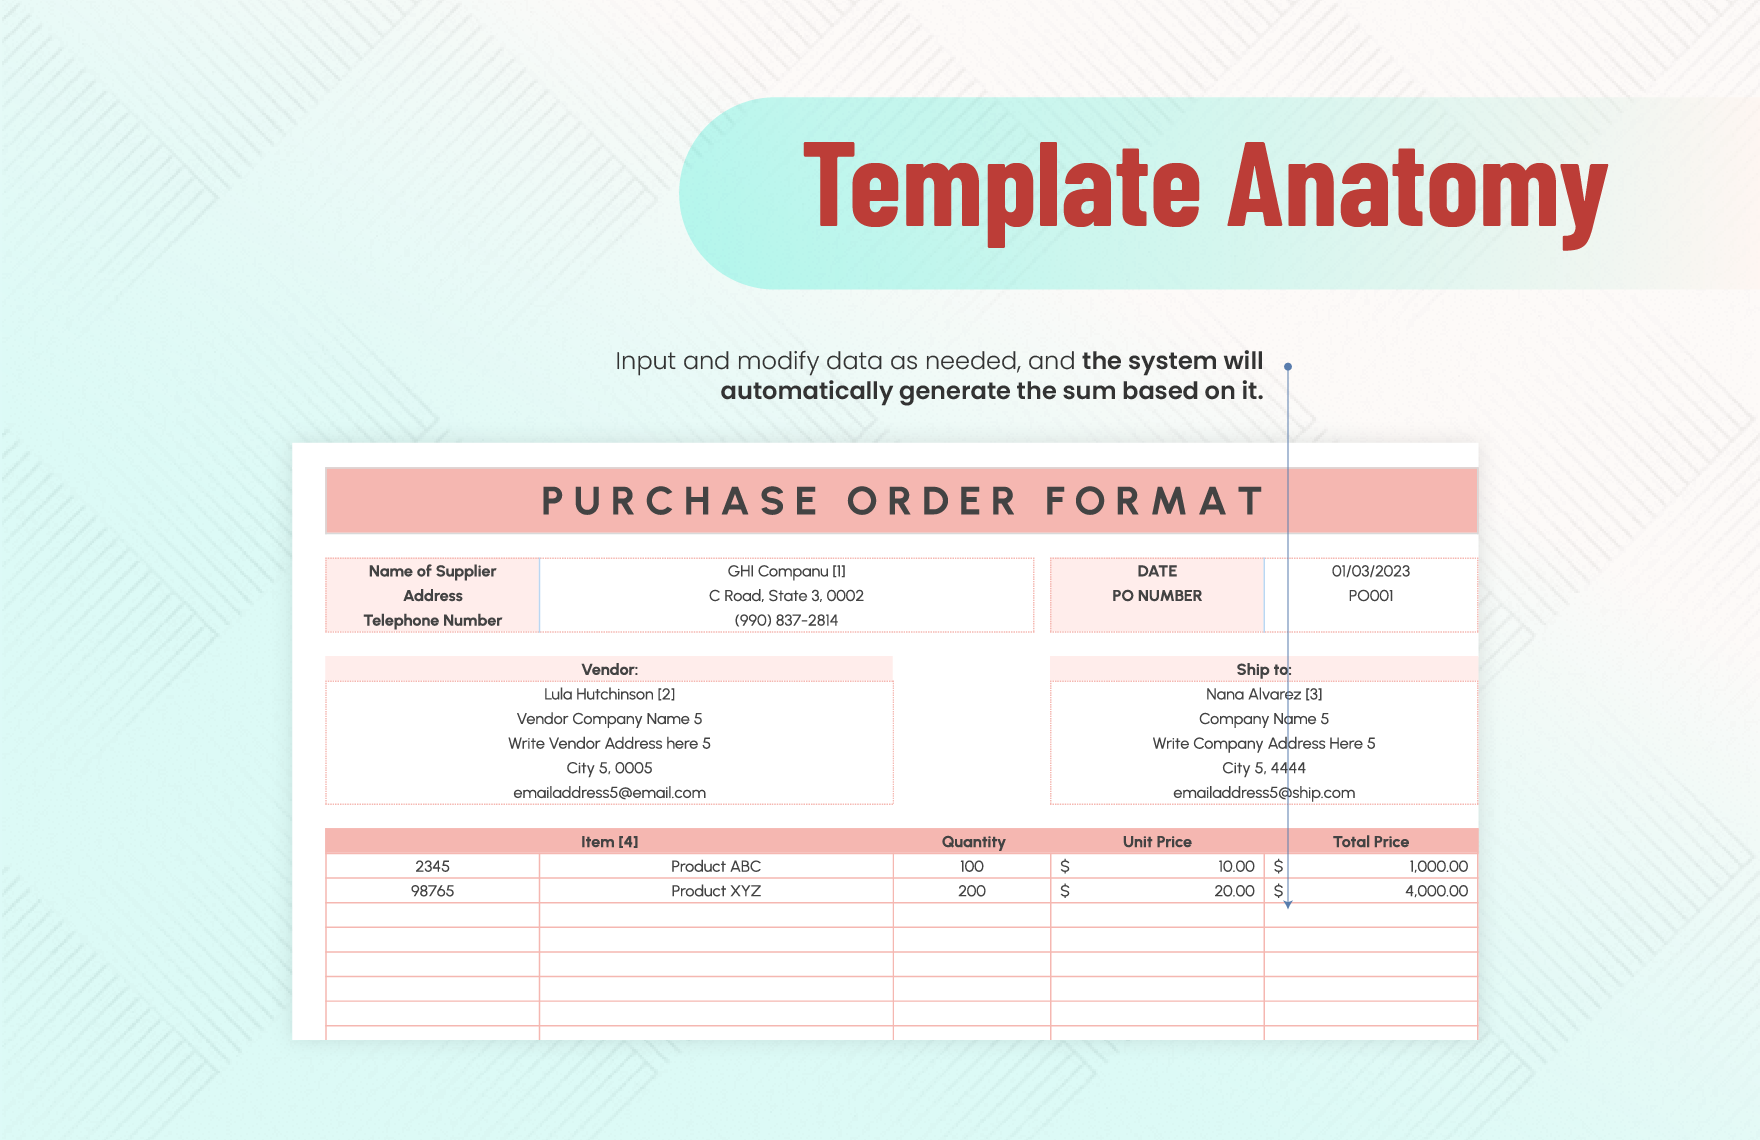 Purchase Order Format Template